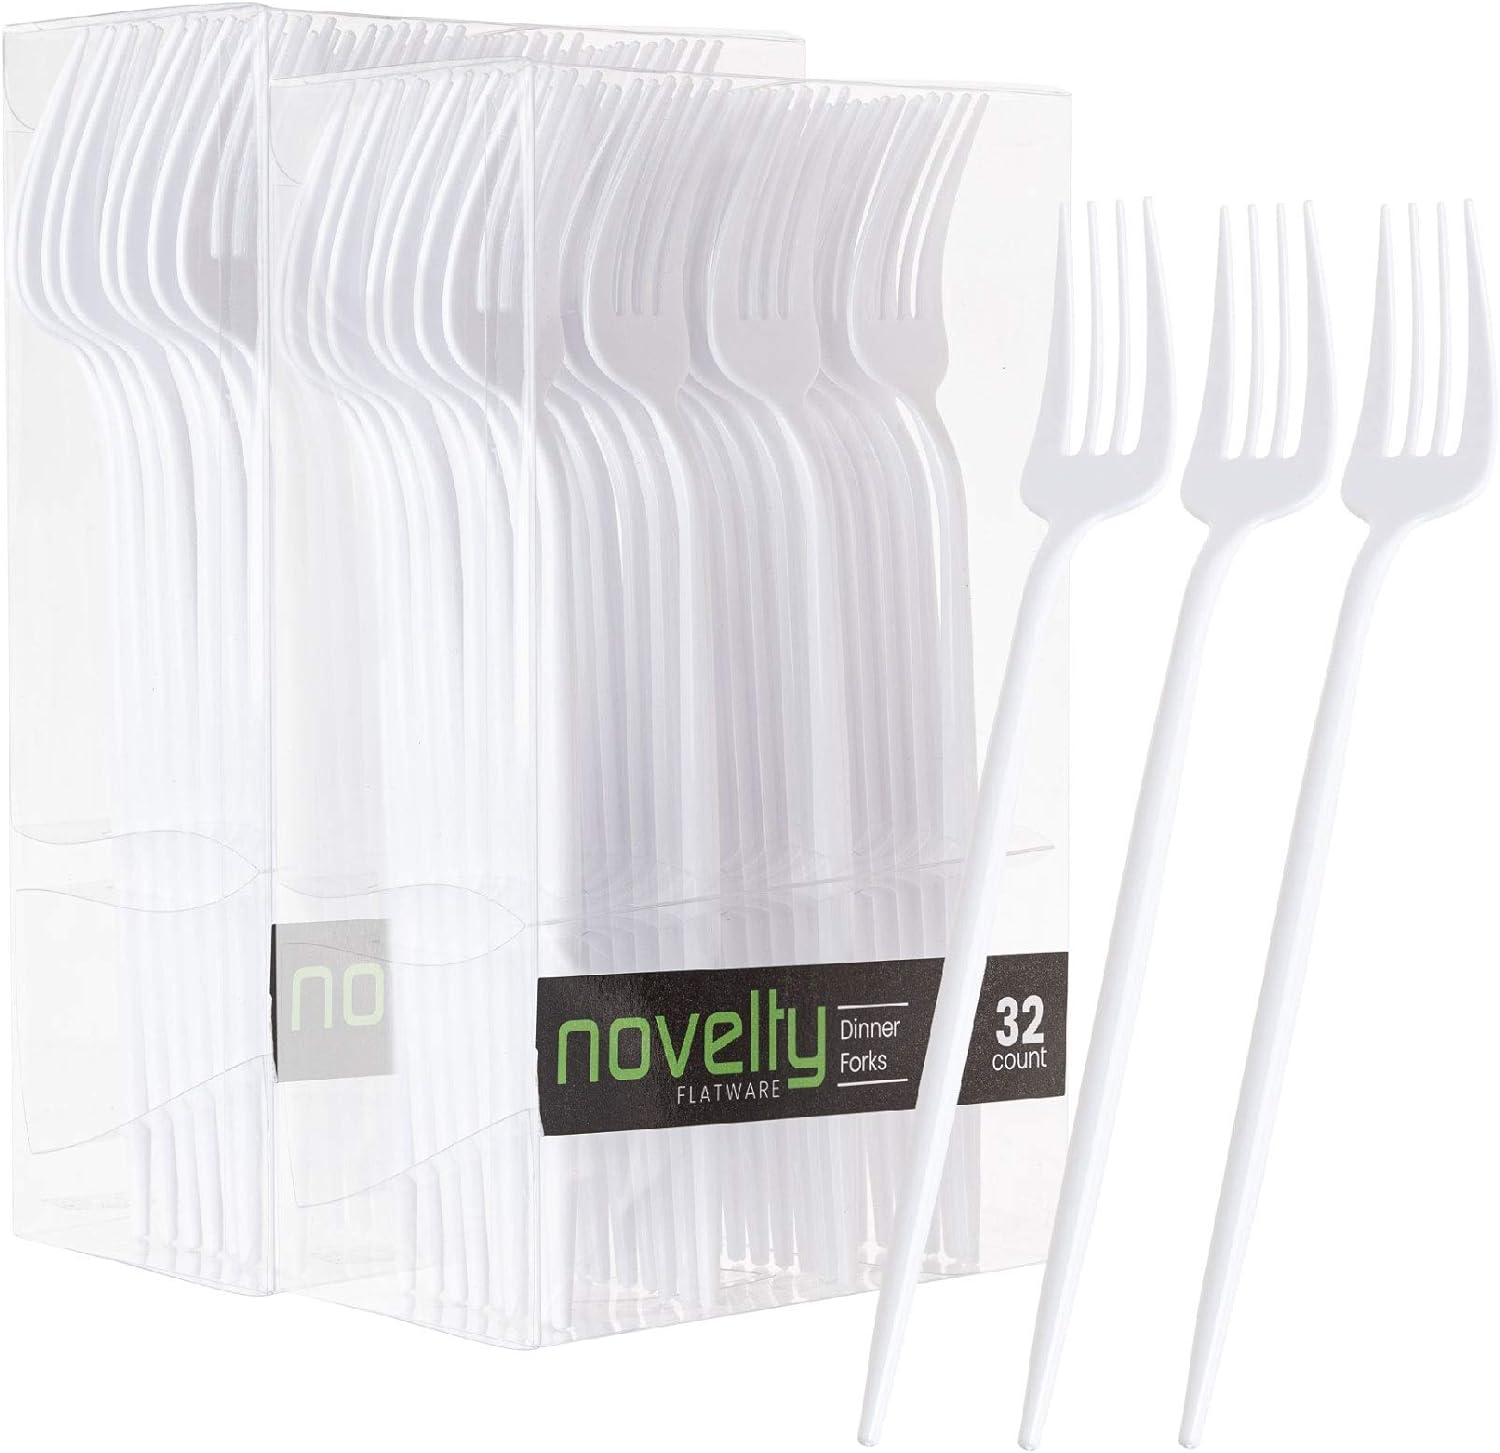 Novelty Modern Flatware, Cutlery, Disposable Plastic Dinner forks Luxury White 64 Count